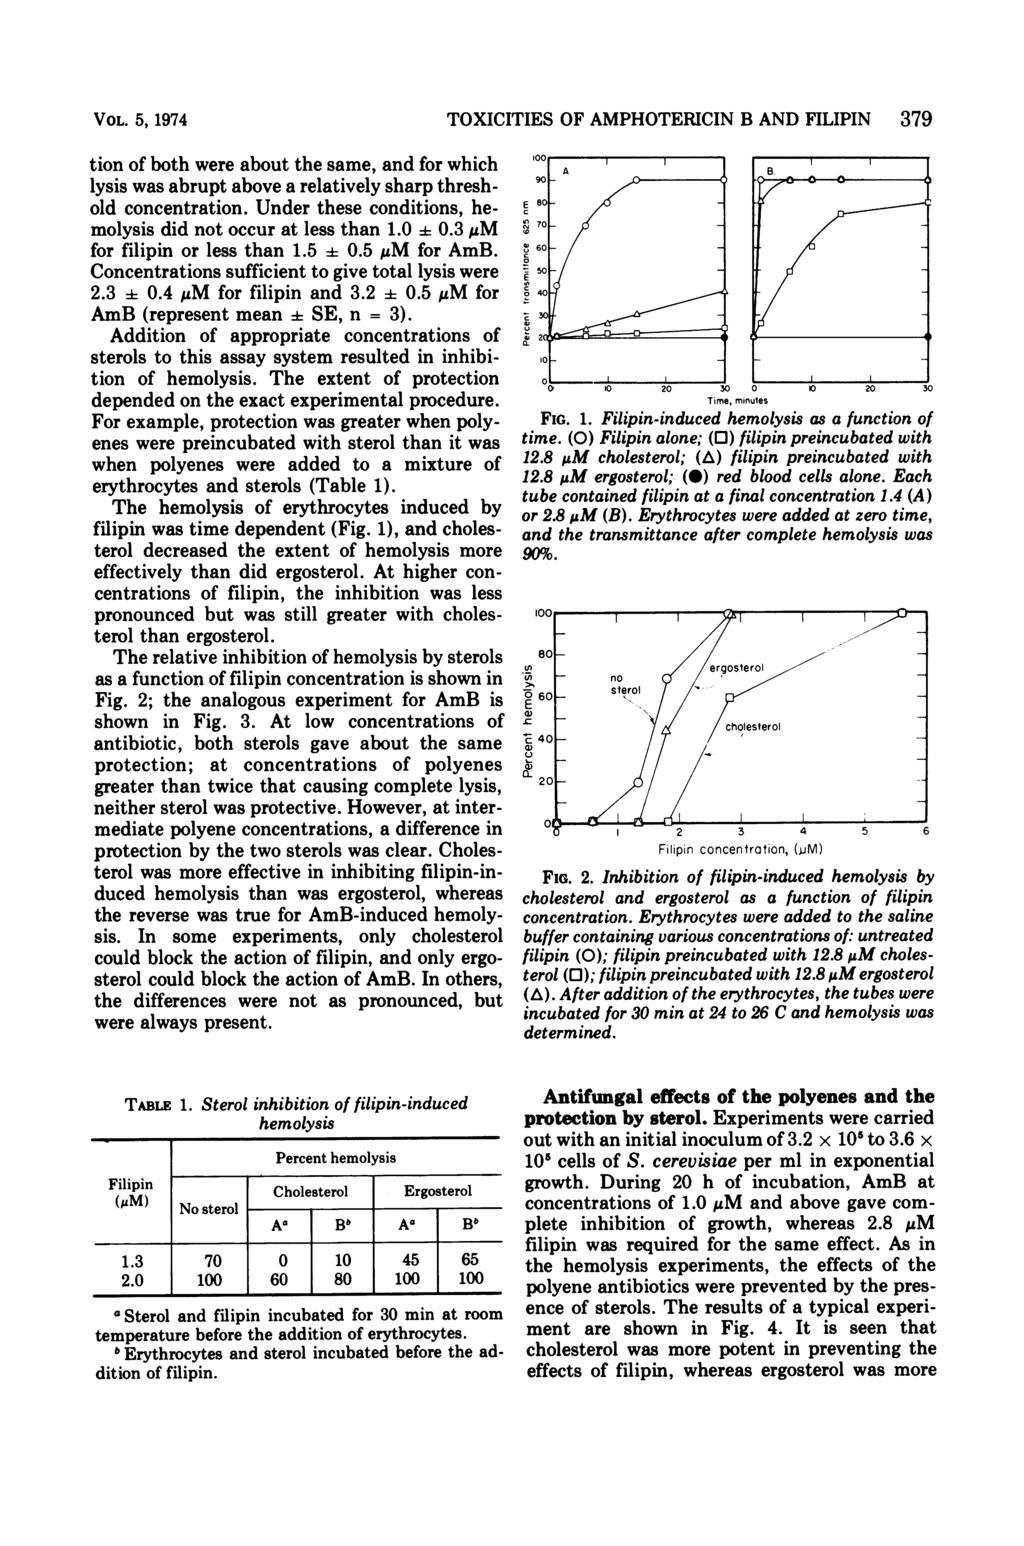 VOL. 5, 1974 tion of both were about the same, and for which lysis was abrupt above a relatively sharp threshold concentration. Under these conditions, hemolysis did not occur at less than 1.0 i 0.